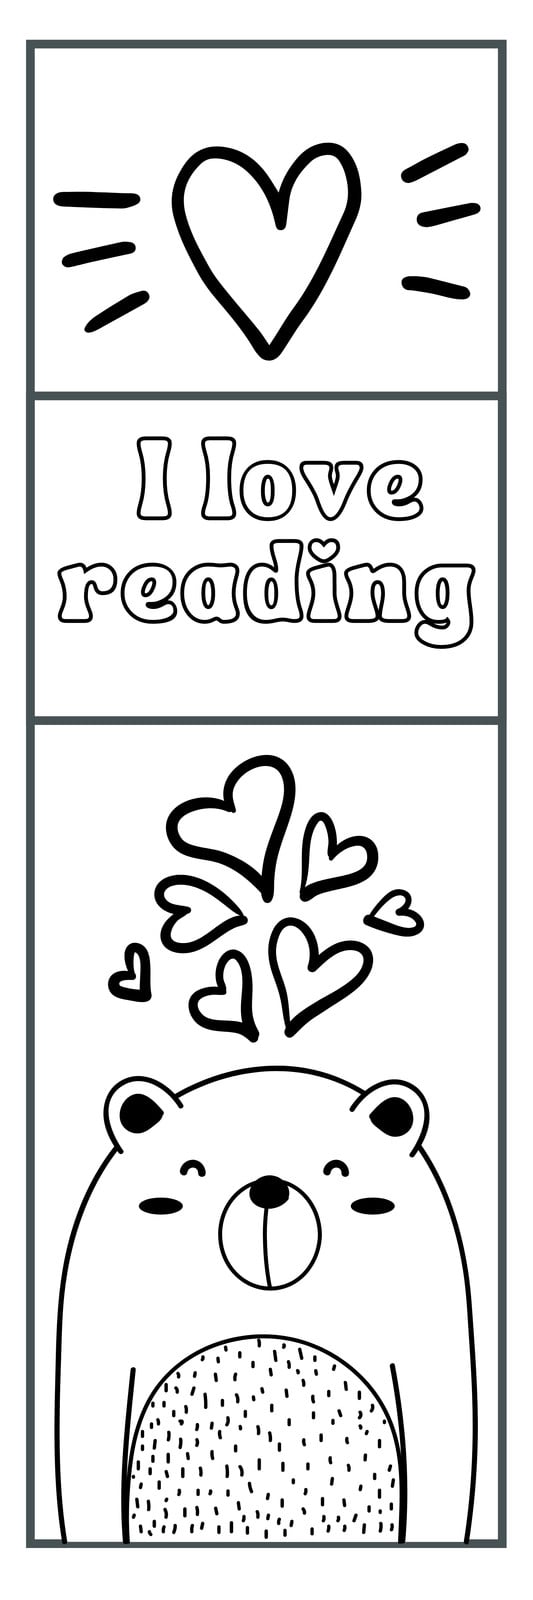 Funny Quotes Coloring Bookmarks – Grifik